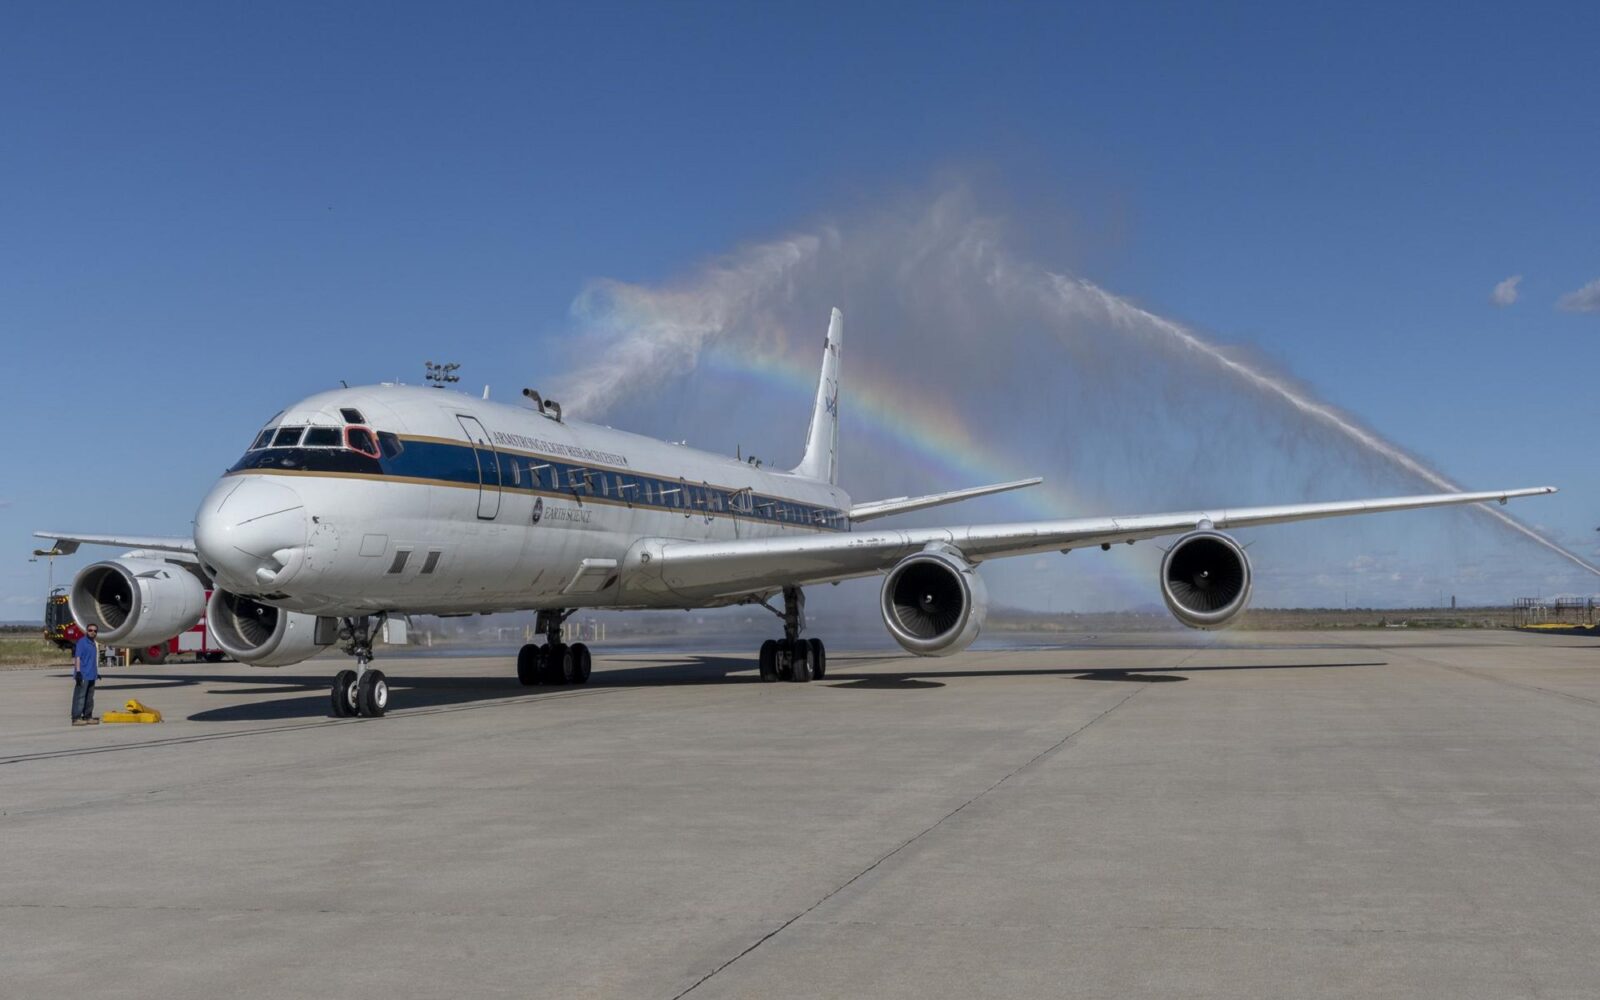 NASA’s DC-8 bows out after 37 years of scientific research